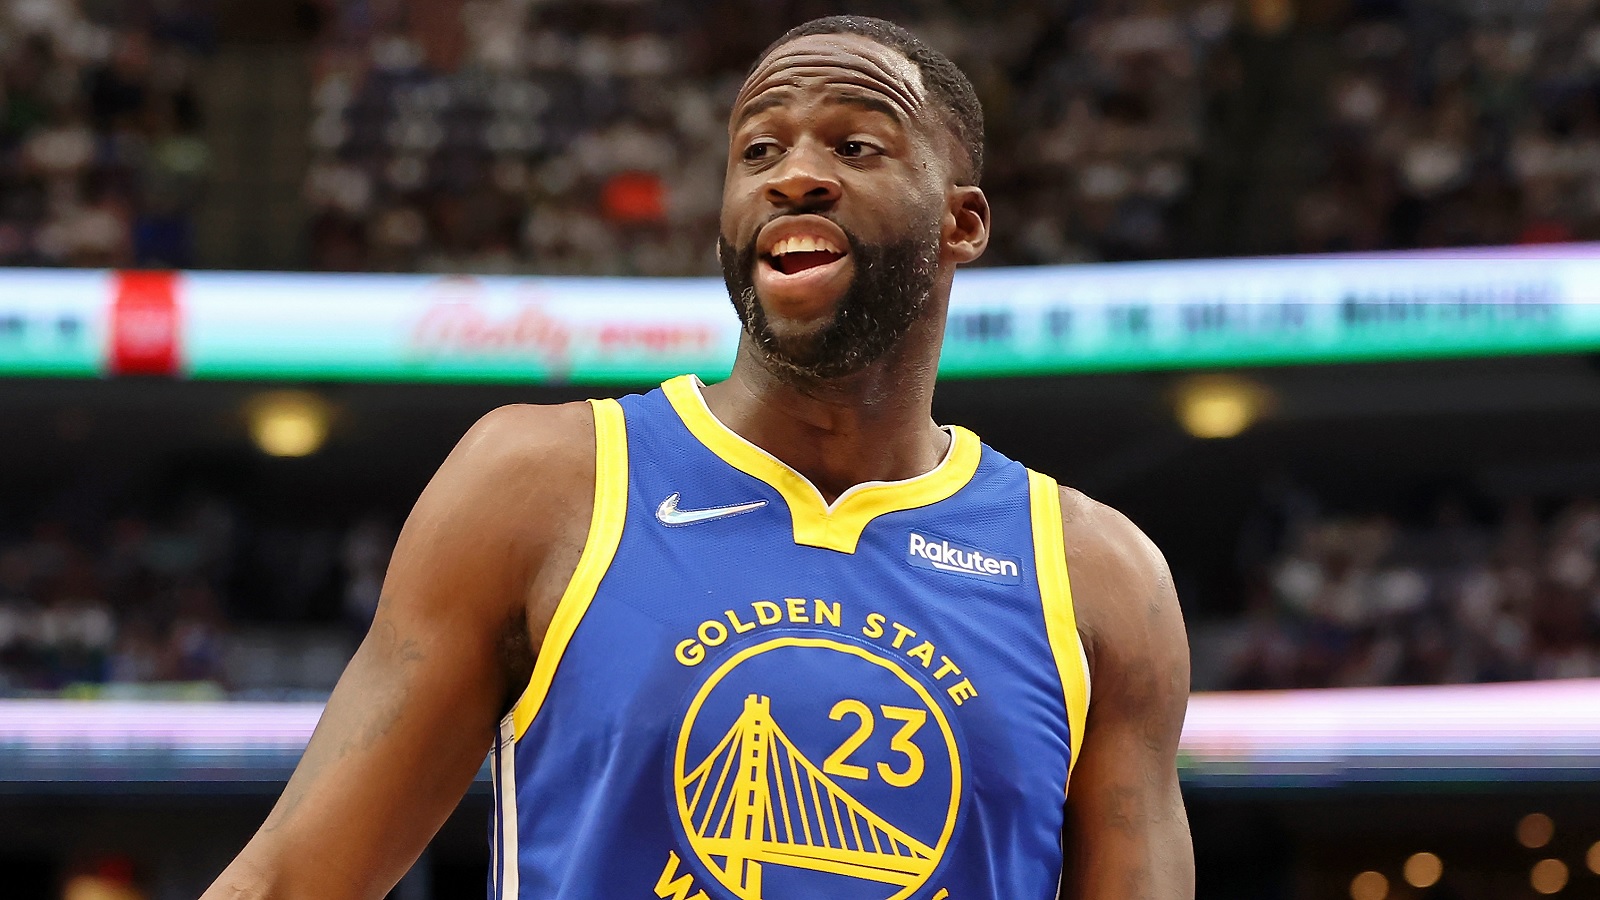 NBA News: Is Draymond Green Playing Tonight vs Blazers? The Indefinite Suspension Could Cost Golden State Warriors Massively